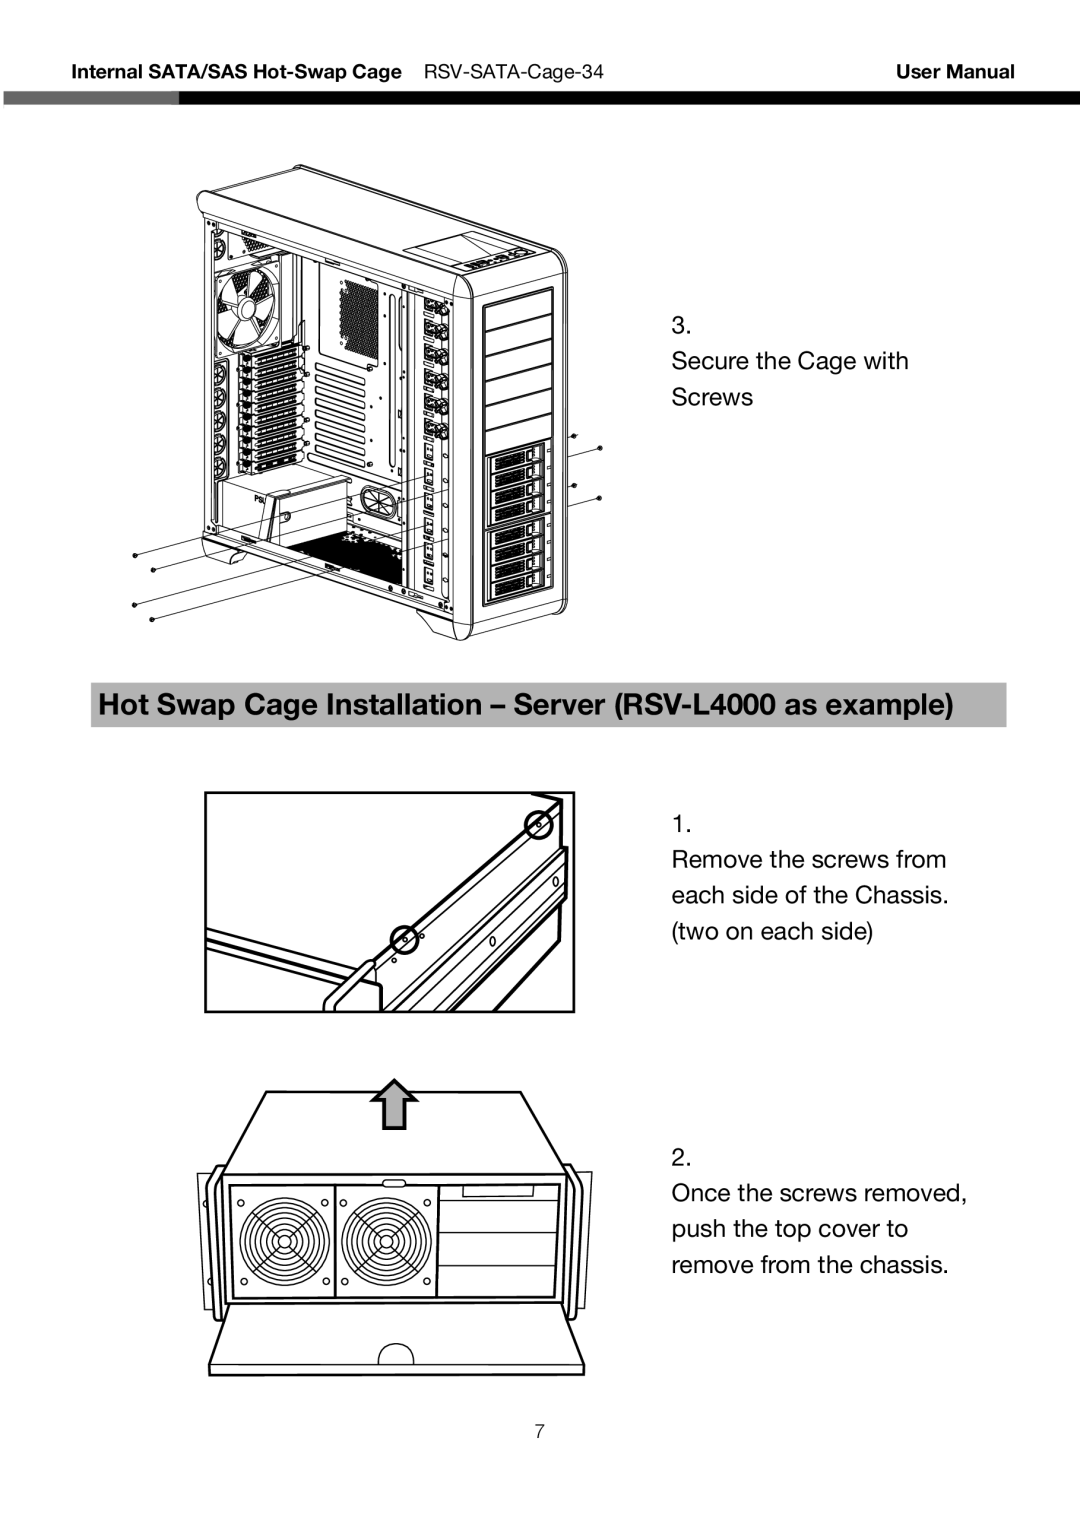 Rosewill user manual Secure the Cage with Screws, Internal SATA/SAS Hot-SwapCage RSV-SATA-Cage-34 